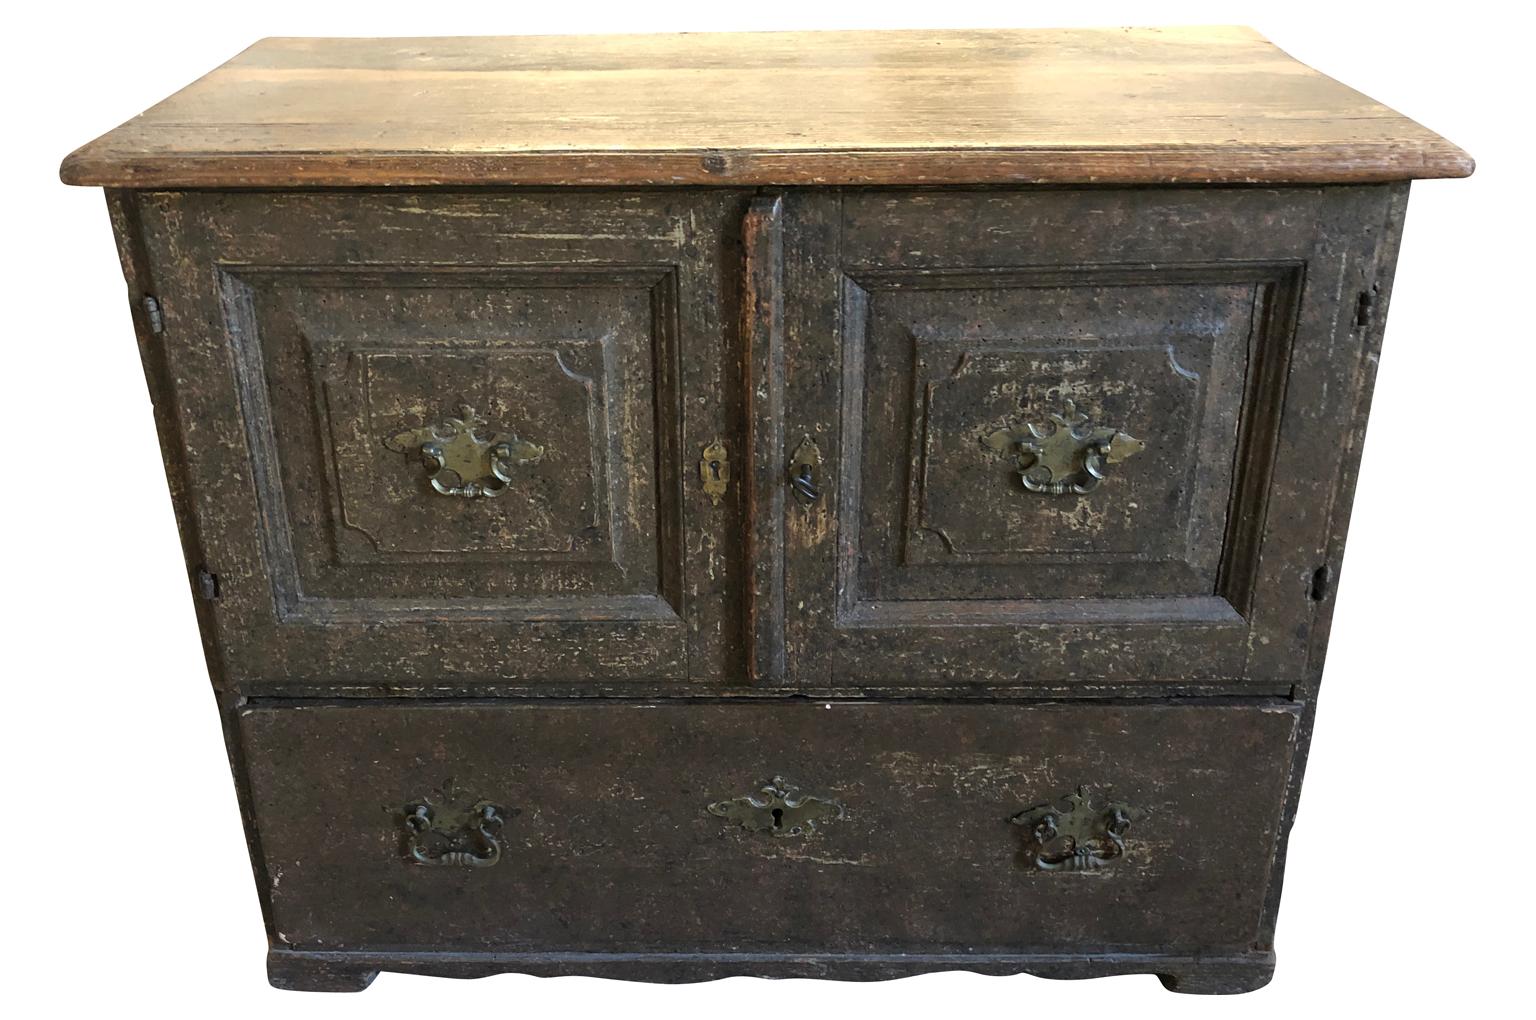 A very handsome mid-18th century Baroque style cabinet from Germany. An interesting construction with double doors over a large drawer in its original painted finish. A terrific storage piece.